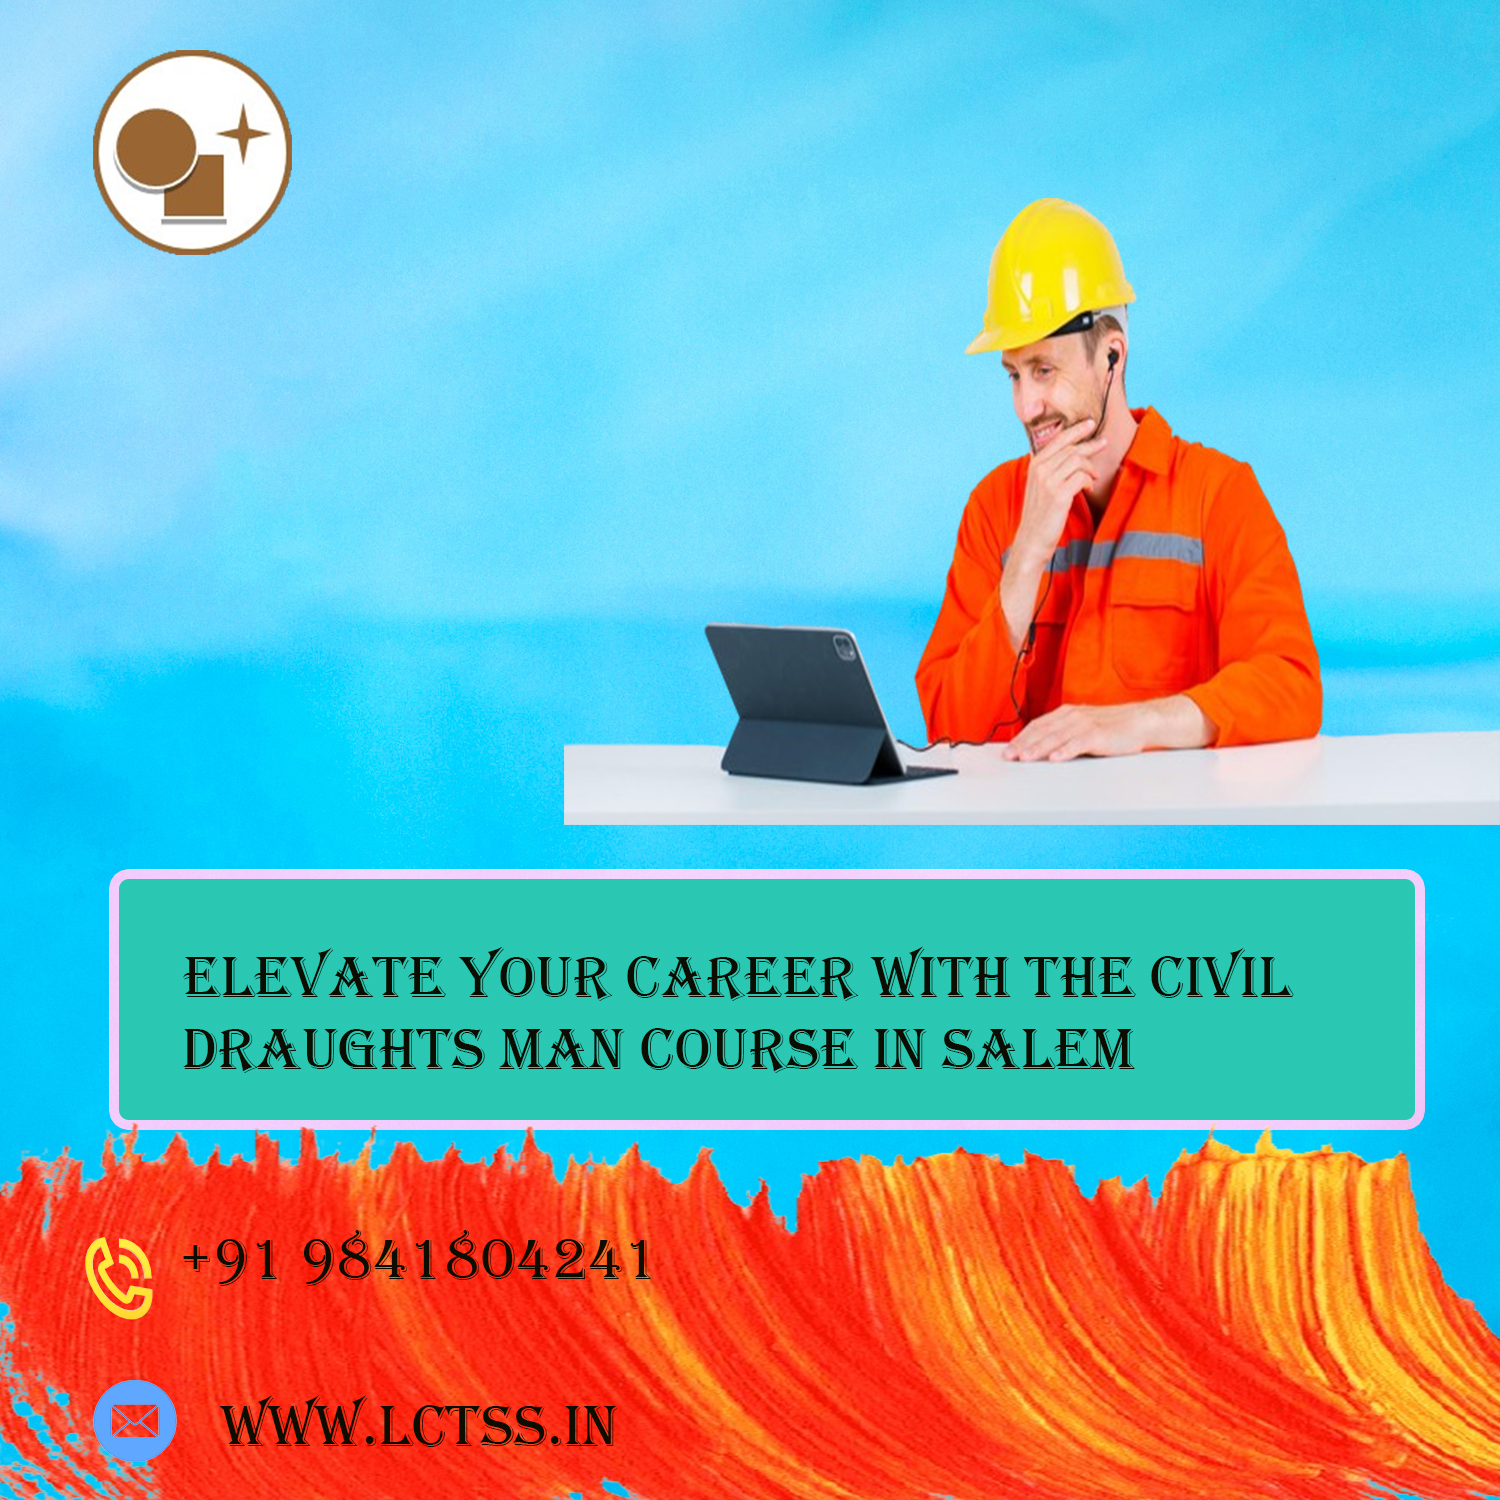 Elevate Your Career with the Civil Draughts Man Course in Salem